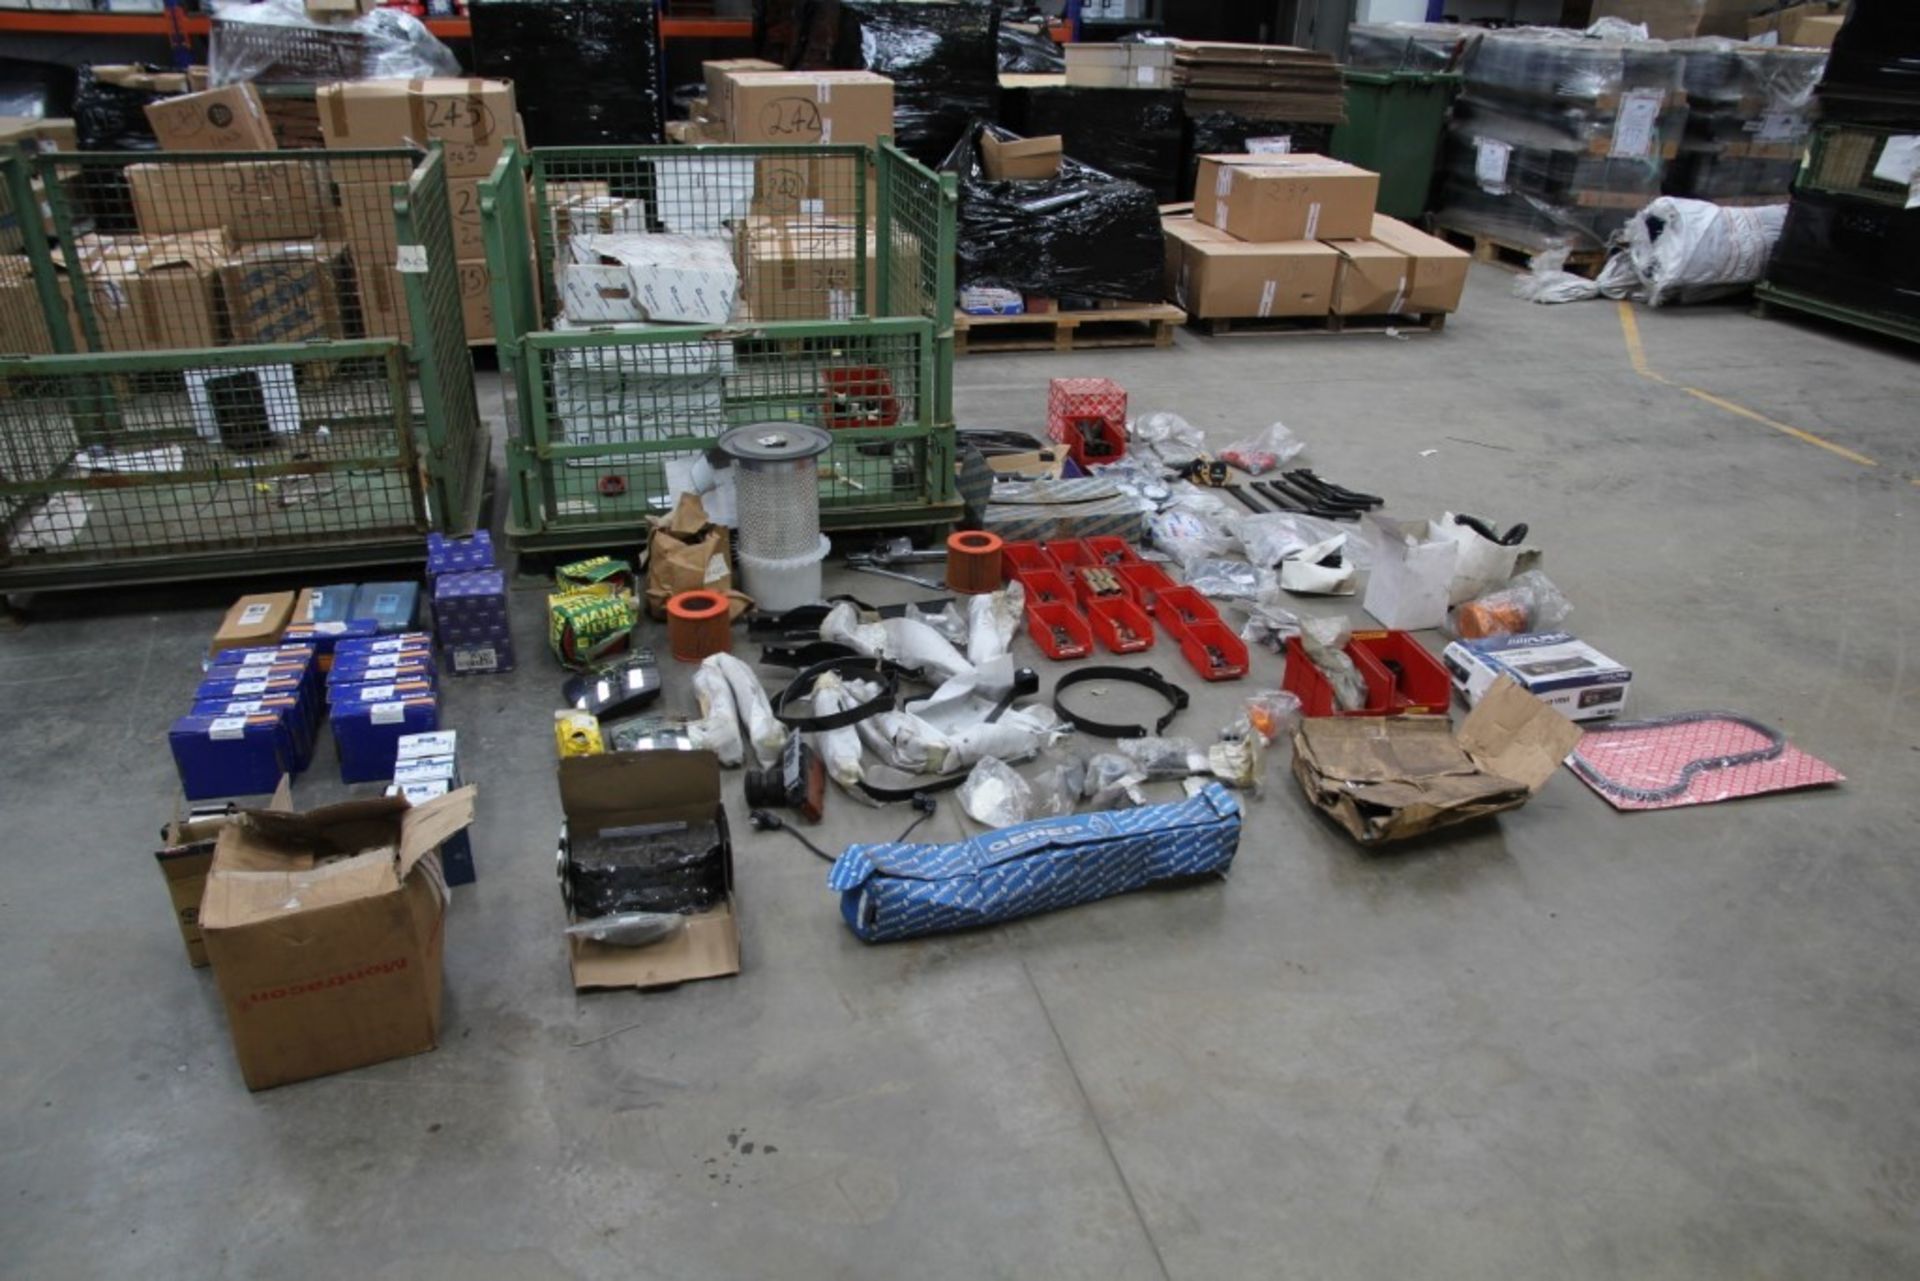 Assorted Truck Spares incl. Jost, Knorr-Bremse & Others (1 Pallet)